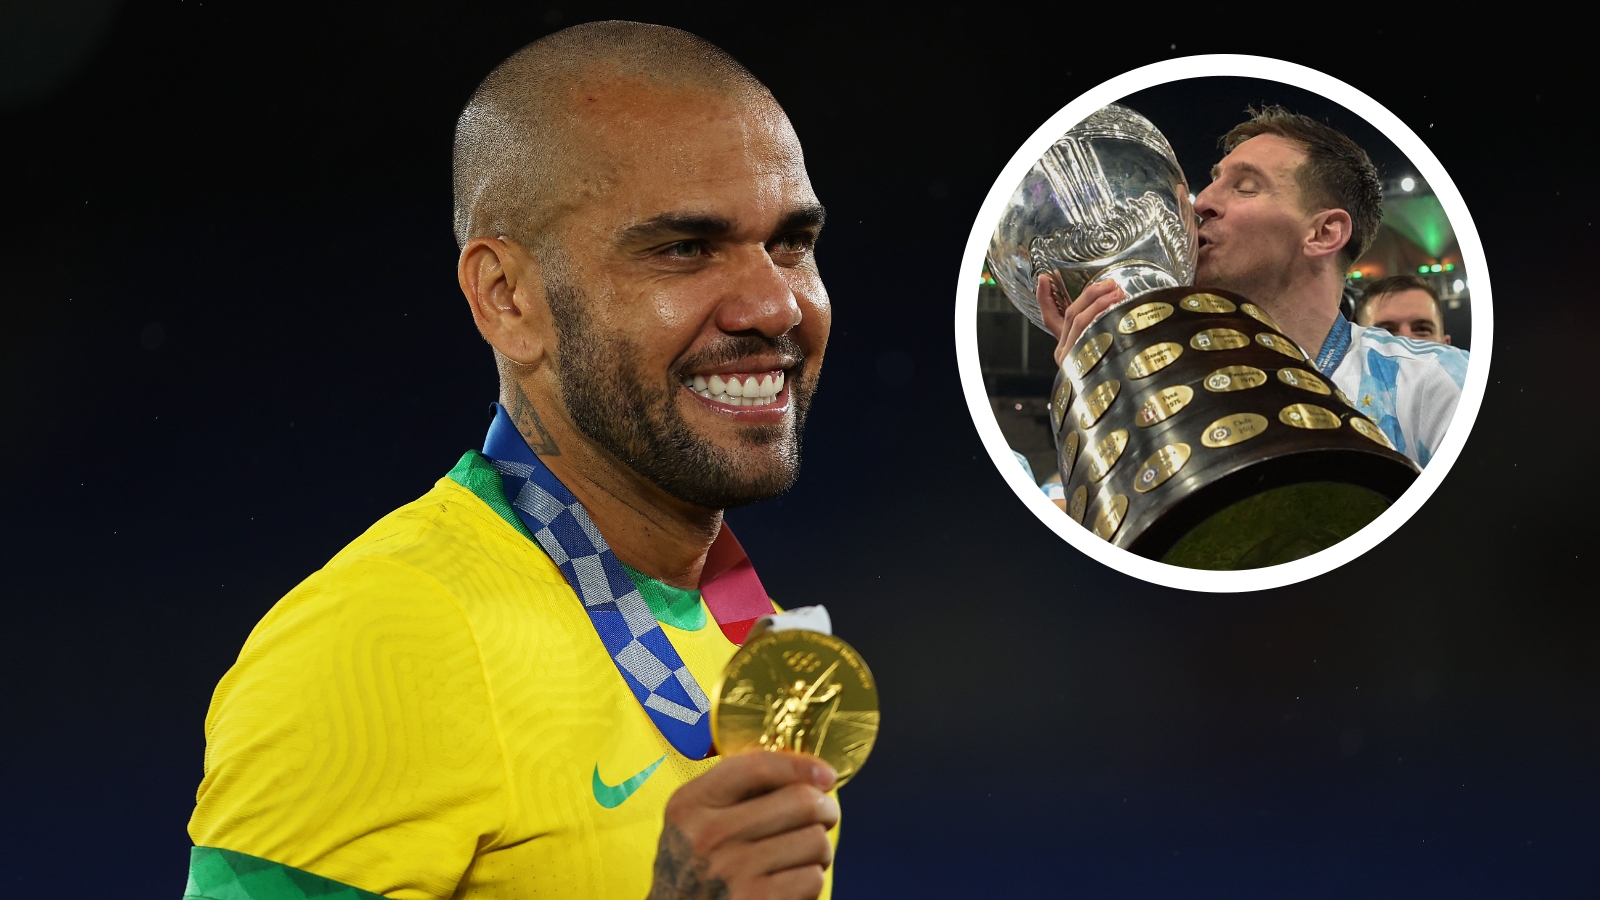 Dani Alves responds to Messi eyeing his trophy record as Barcelona legend targets more history